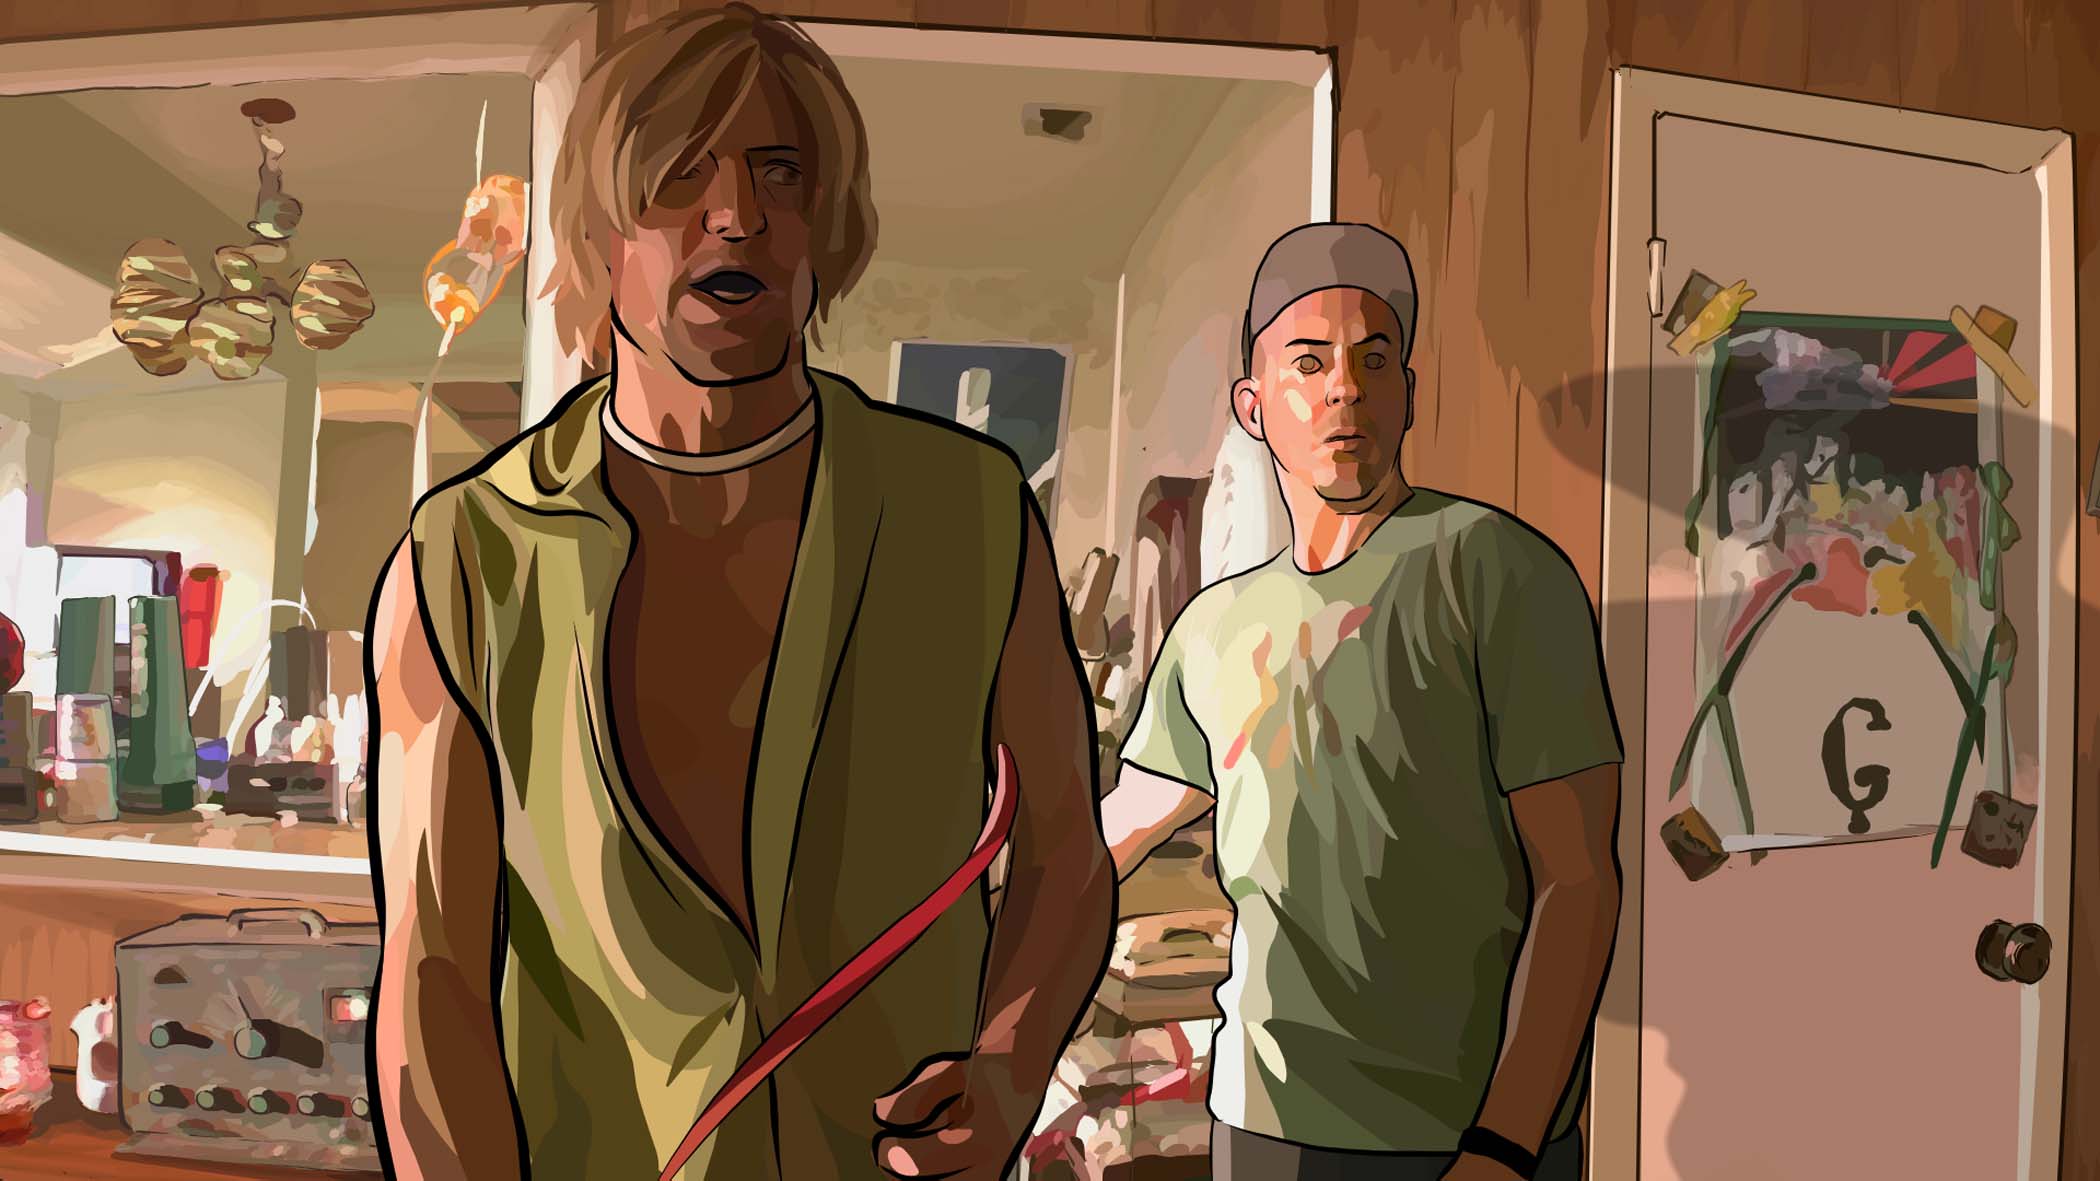 Richard Linklater's A Scanner Darkly is an example of the unique